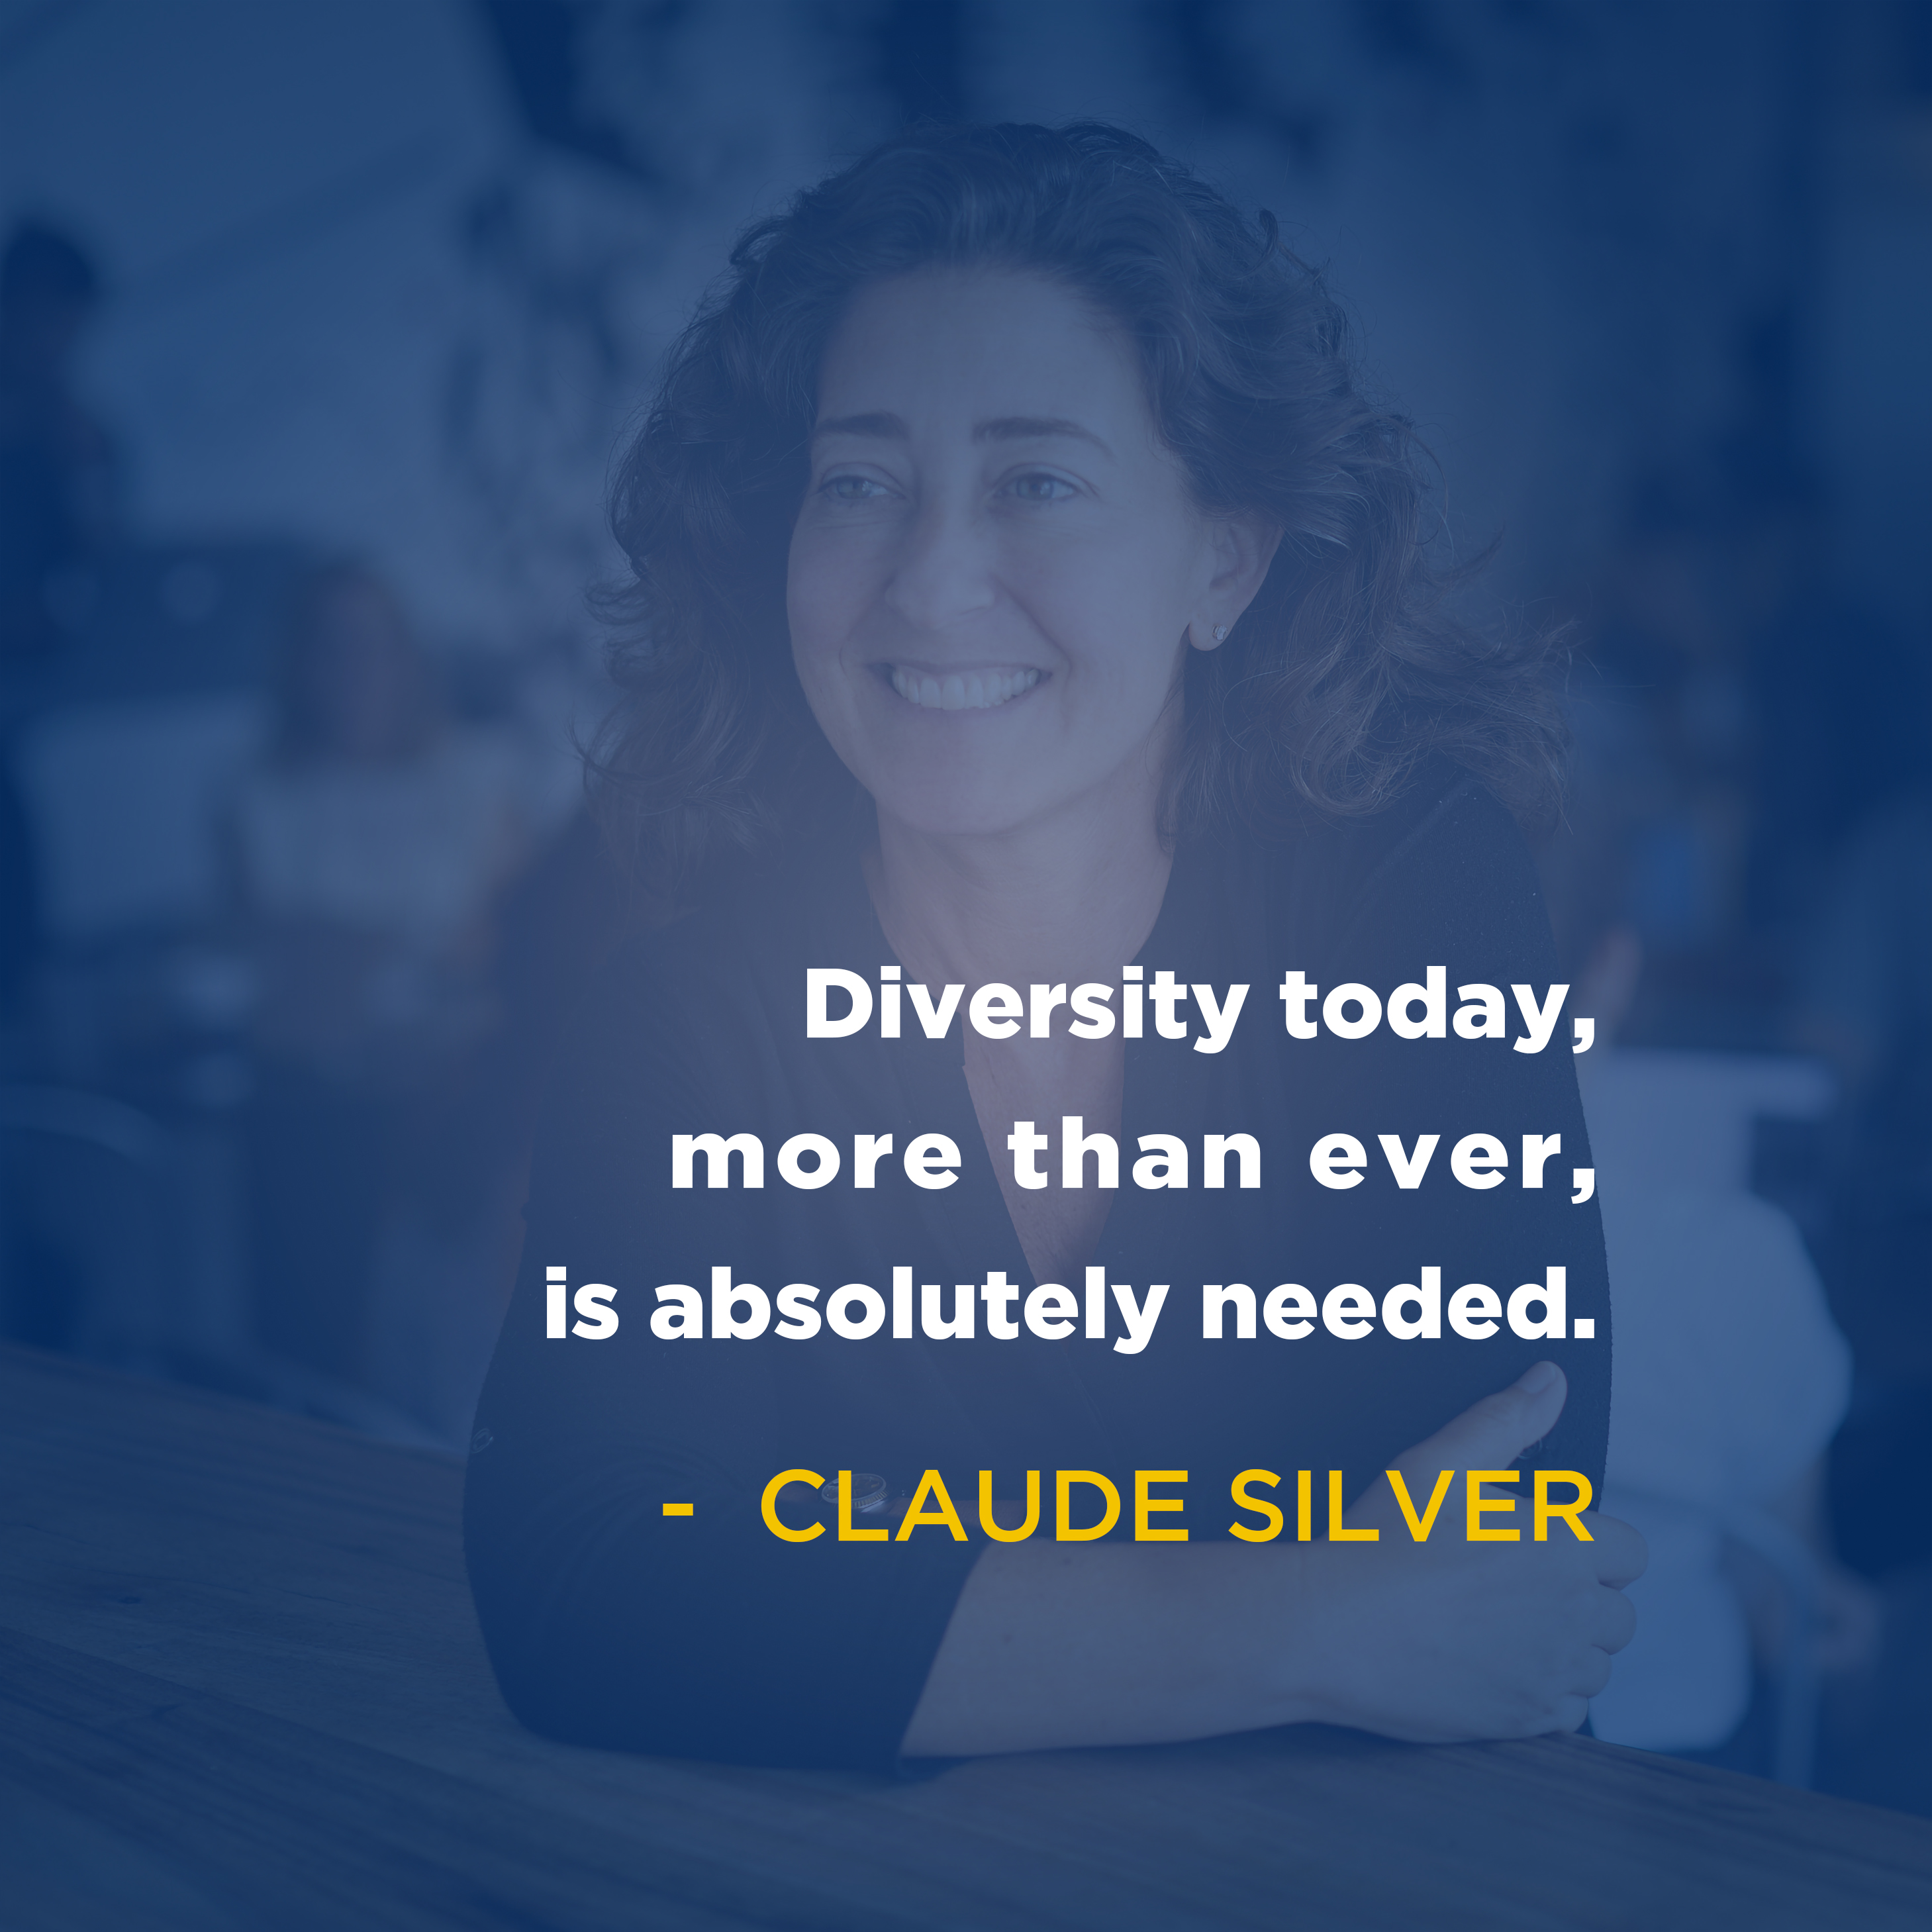 "Diversity today, more than ever, is absolutely needed." -Claude Silver